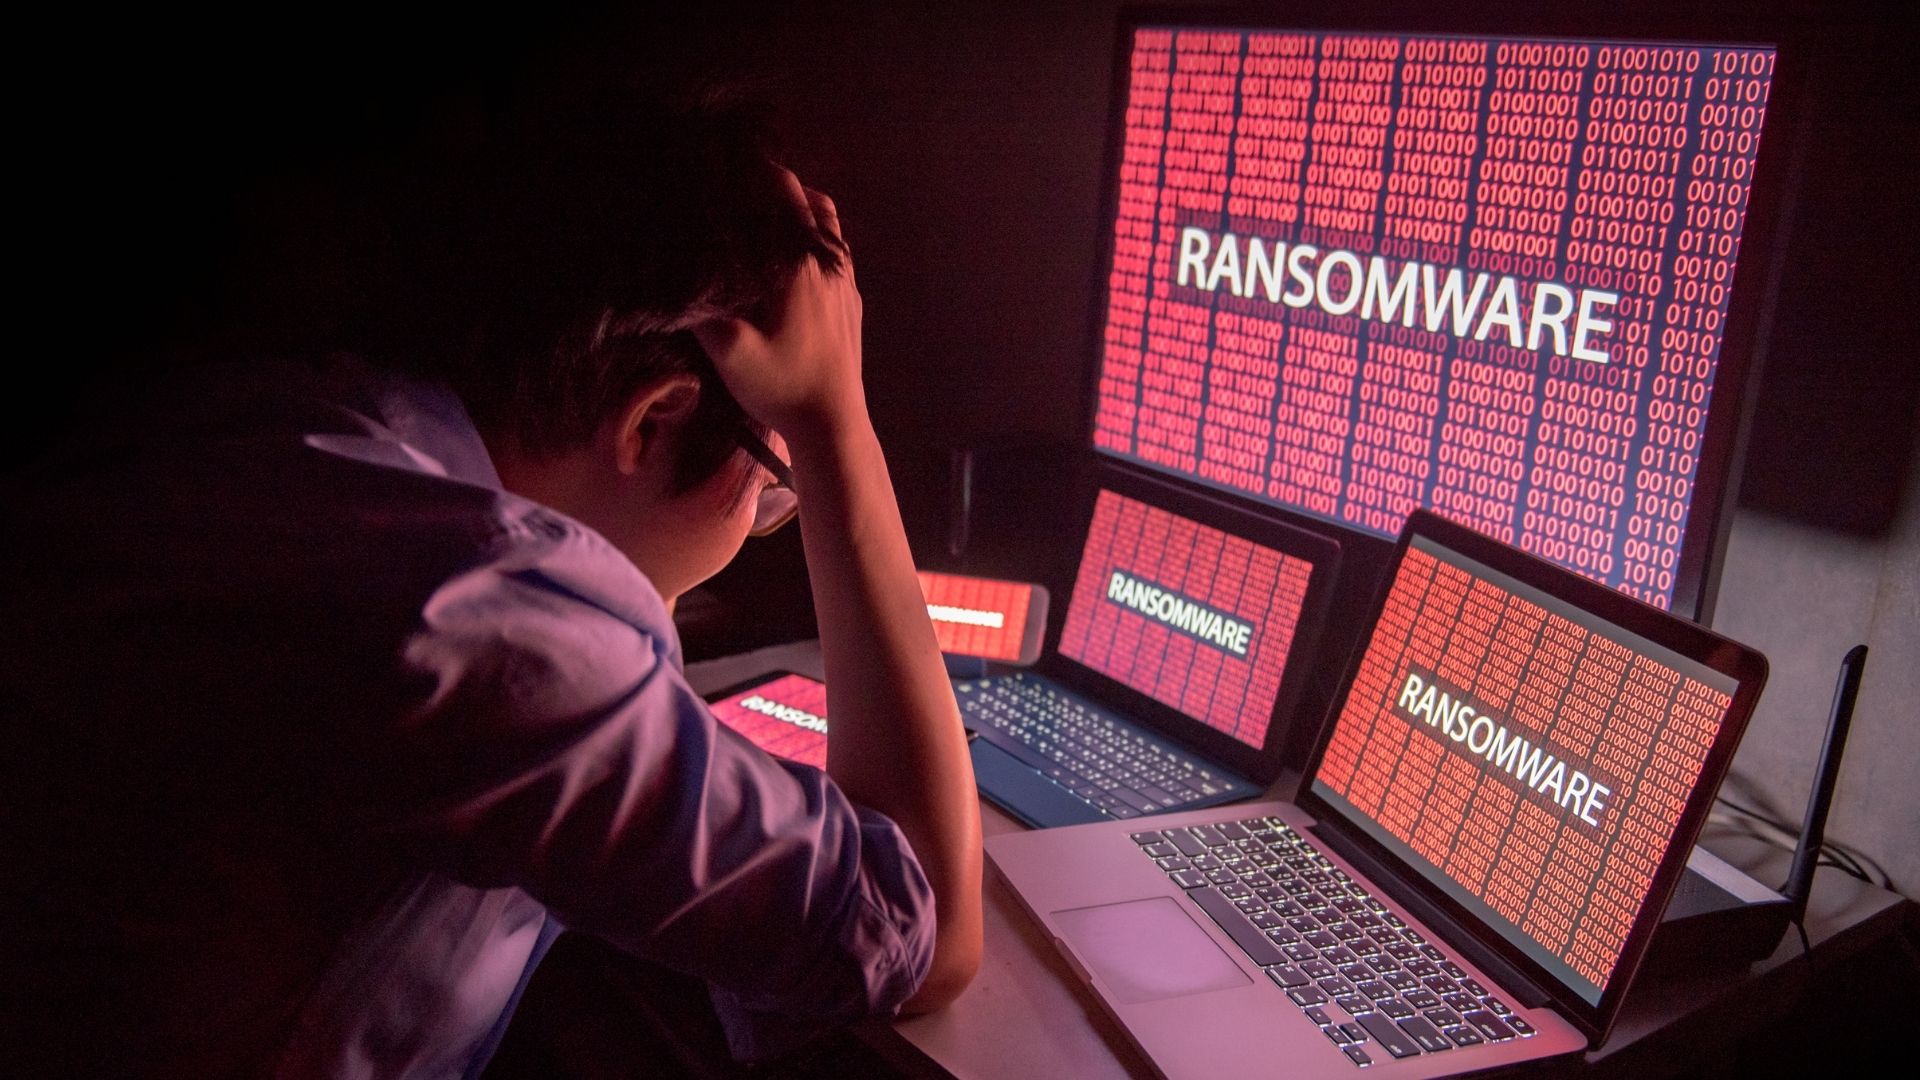 Ransomware Recovery VS Paying The Ransom. Which is Better?